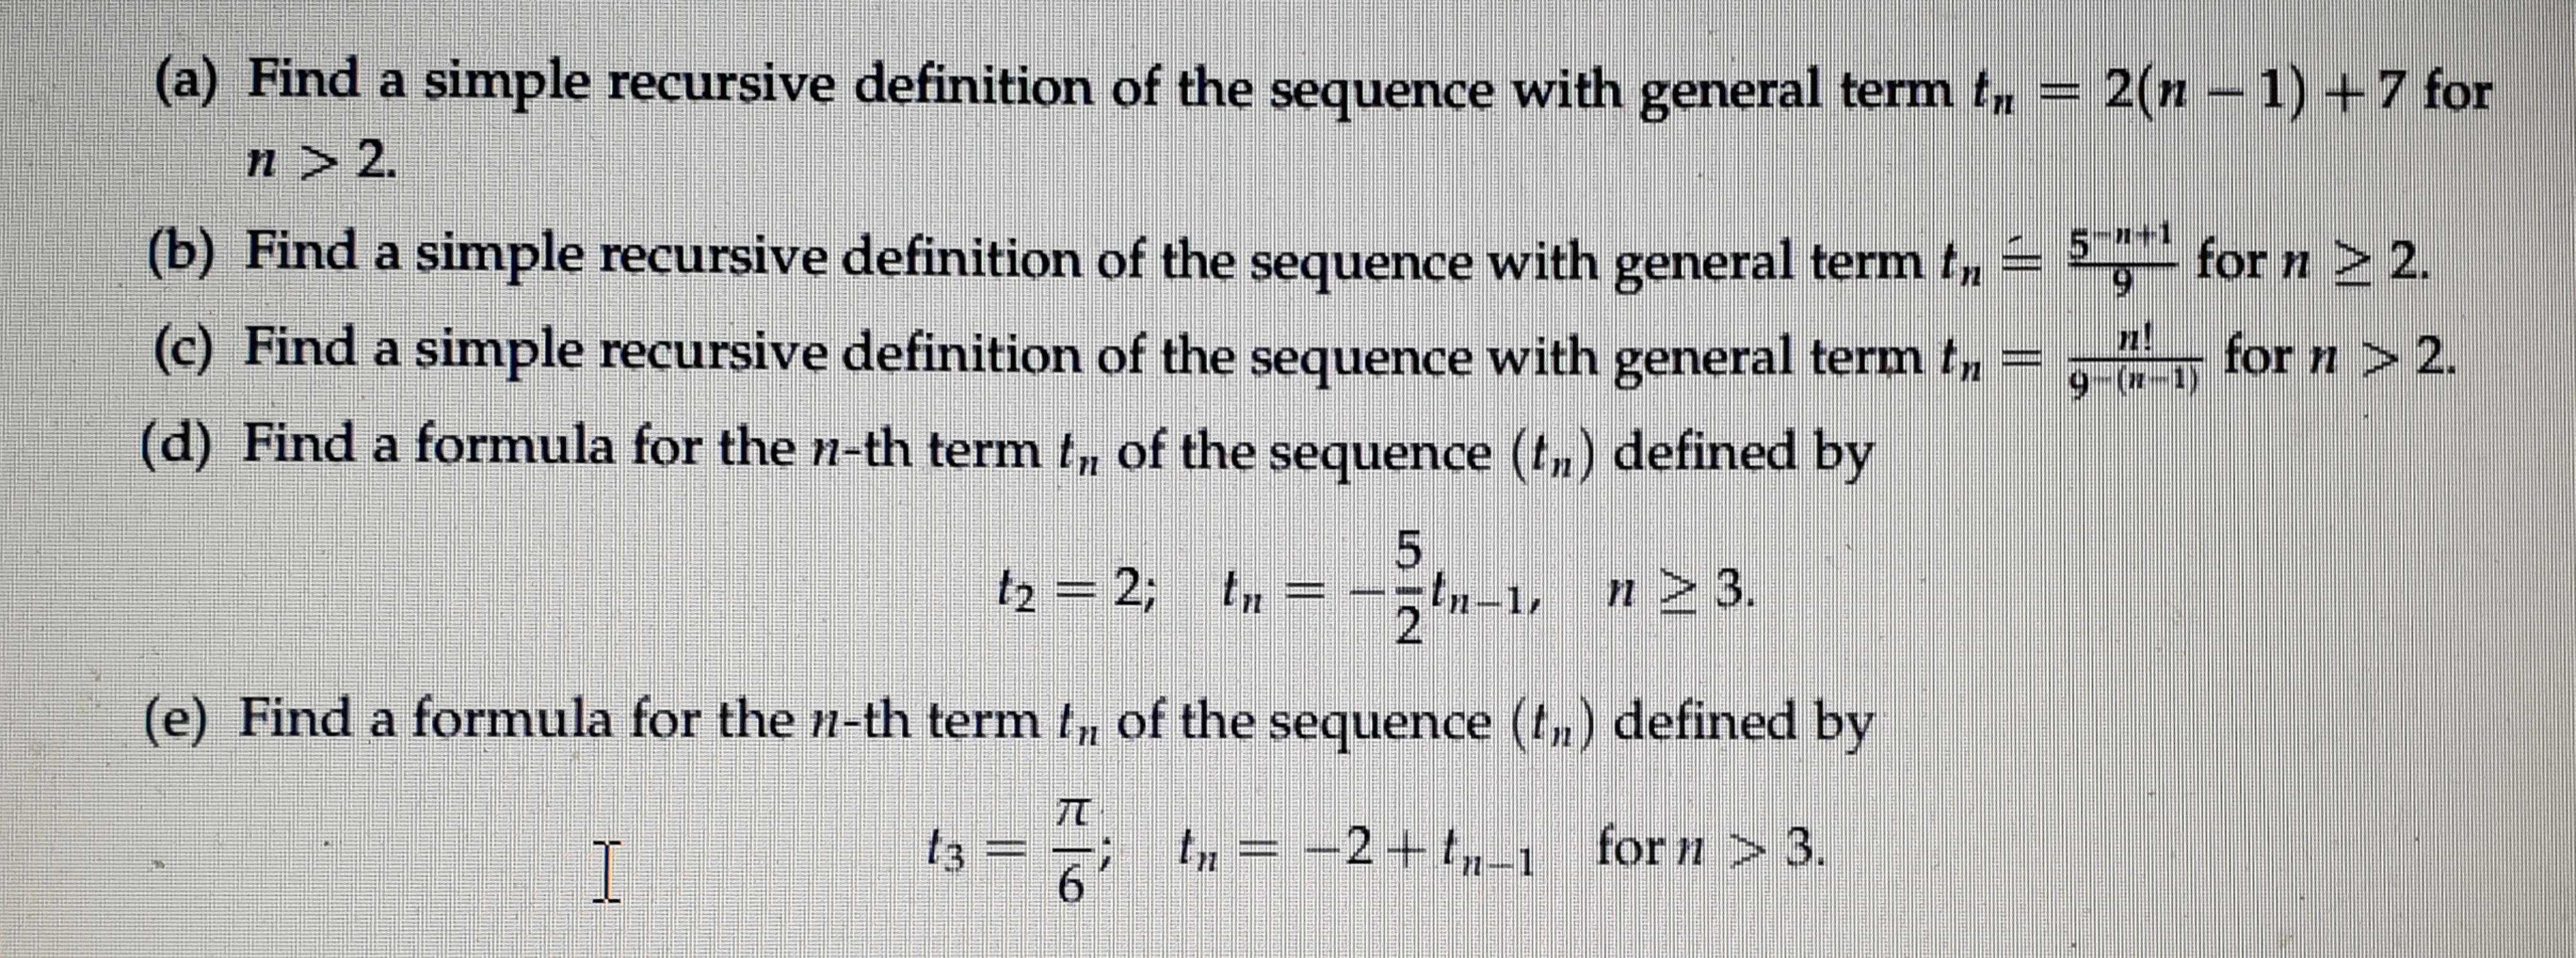 (a) Find a simple recursive definition of the sequence with general term t, = 2(n 1) +7 for
n > 2.
(b) Find a simple recursive definition of the sequence with general term t, = ,- for n 2 2.
5-1+1
(c) Find a simple recursive definition of the sequence with general term tn
for n > 2.
9 (*-1)
